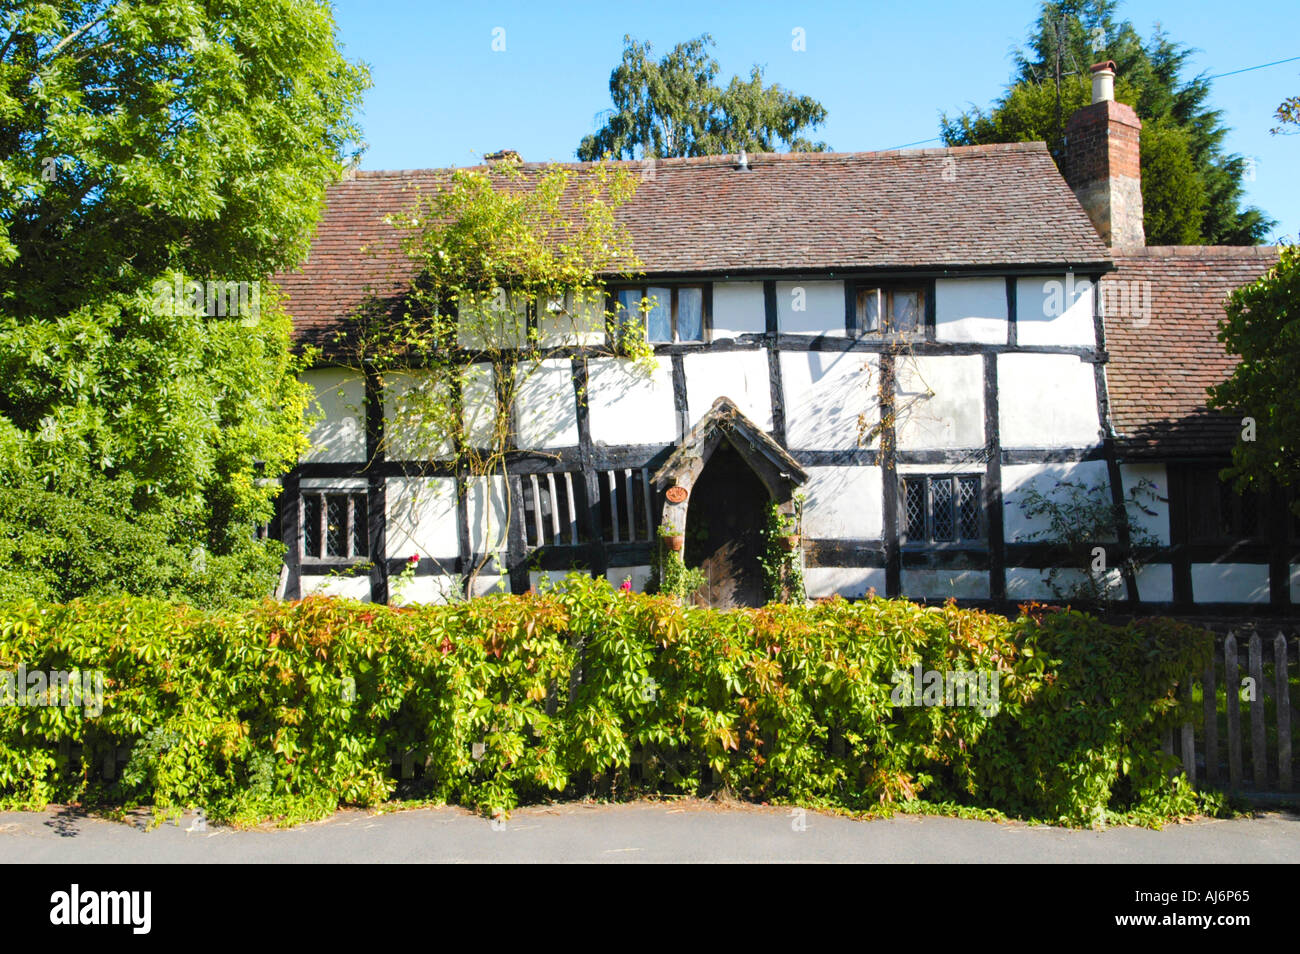 Black and white timber framed cottage in the picturesque rural village of Eardisland Herefordshire England UK Stock Photo